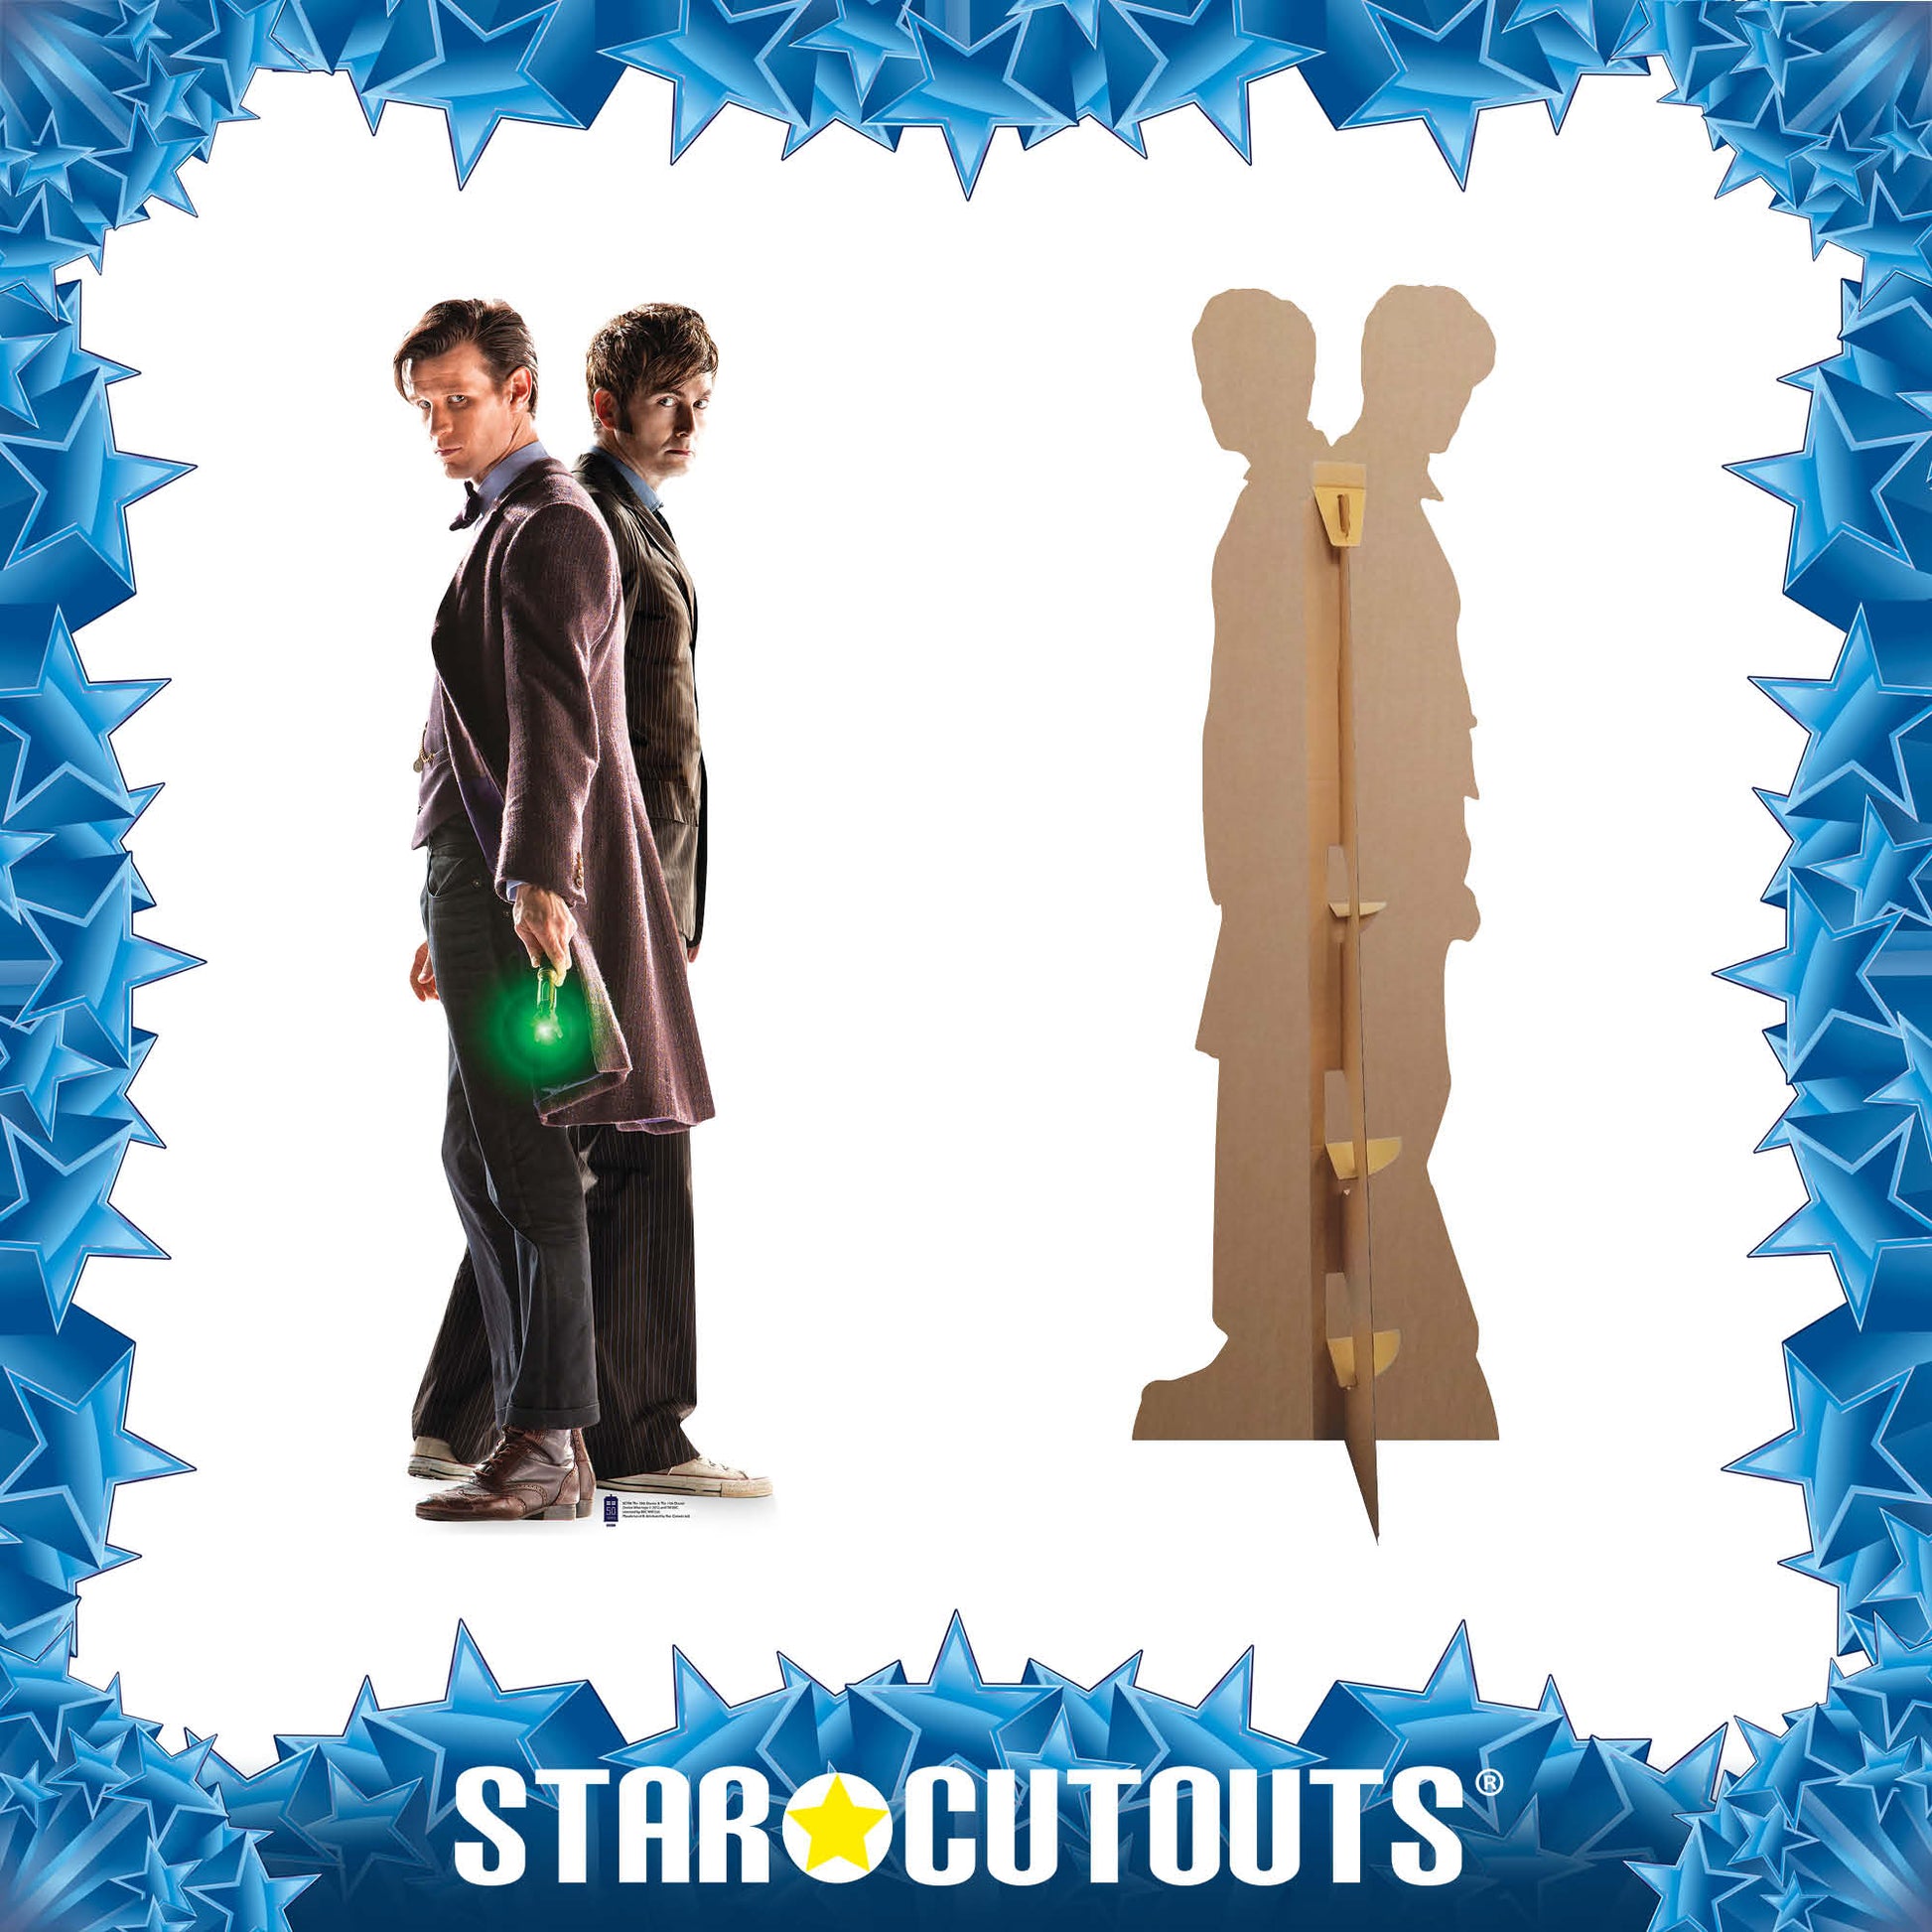 10th & 11th Doctor 50th Anniversary Special Matt Smith and David Tenant Cardboard Cut Out Height 182cm - Star Cutouts